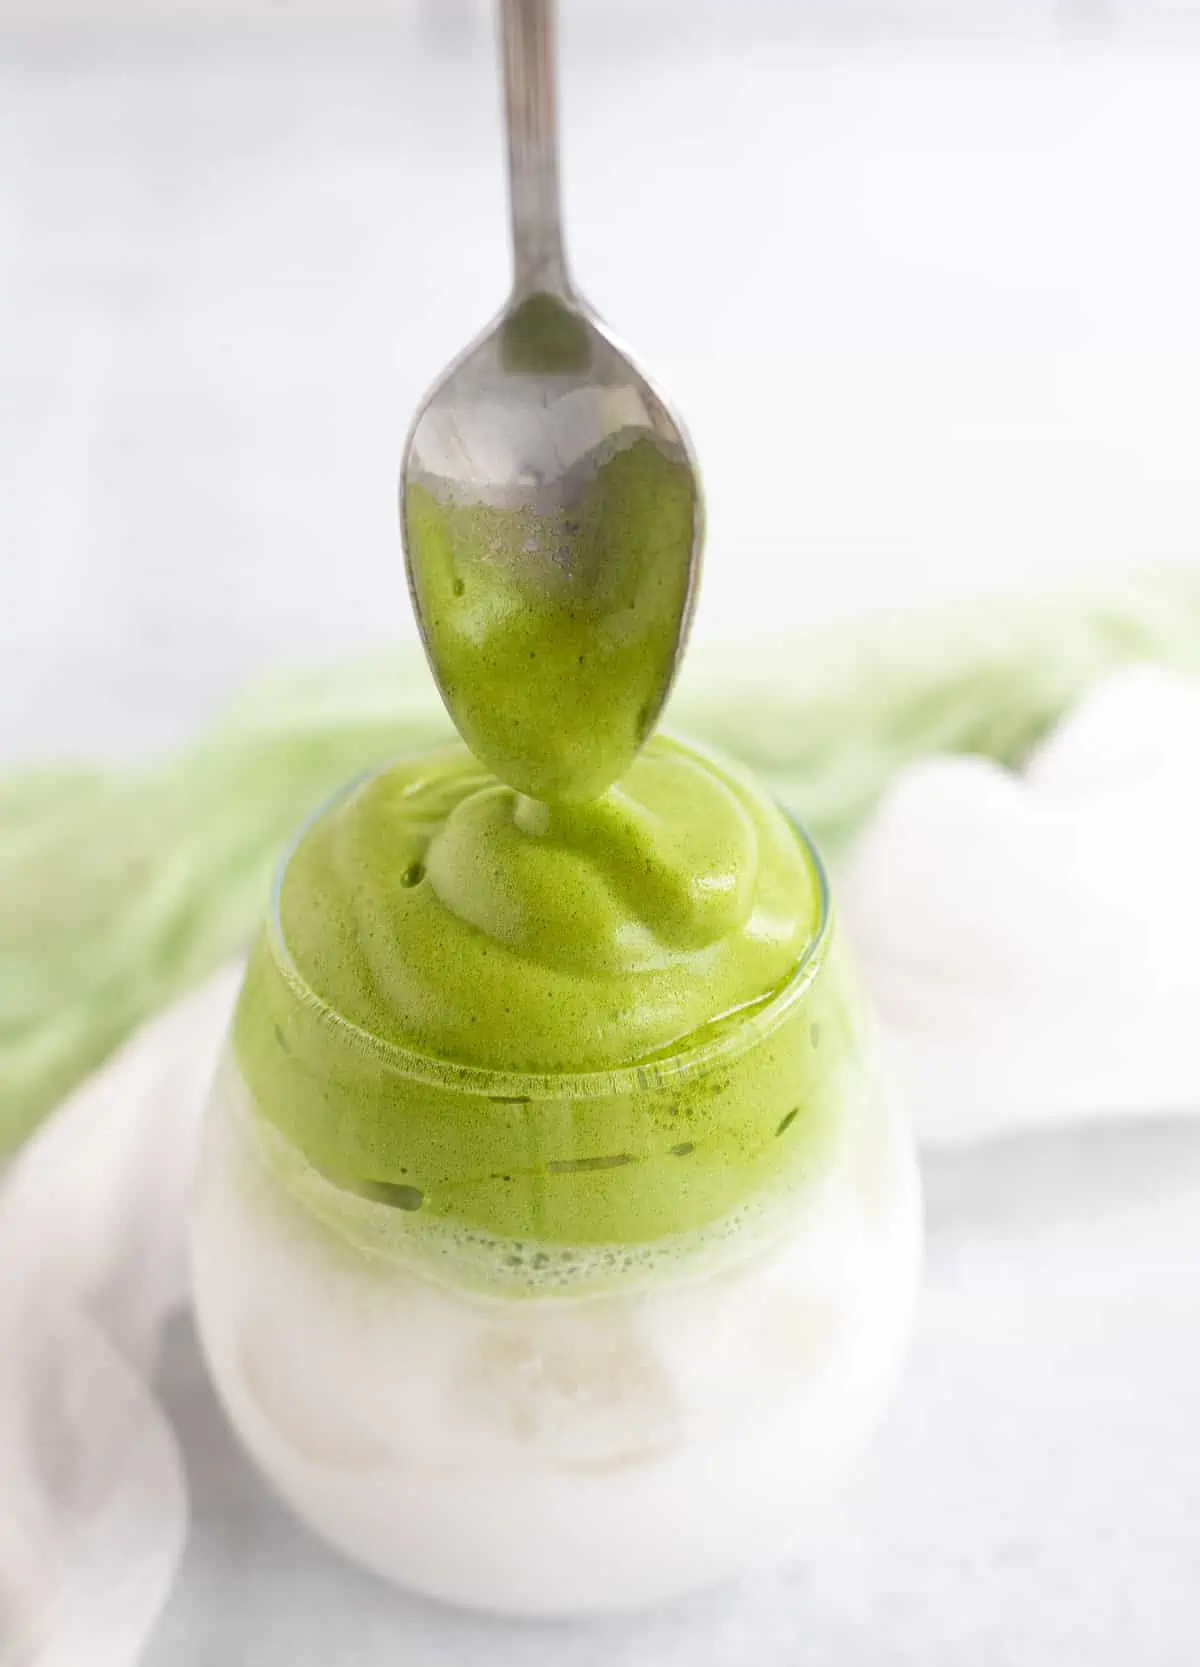 Spoon dipped into whipped matcha in glass.